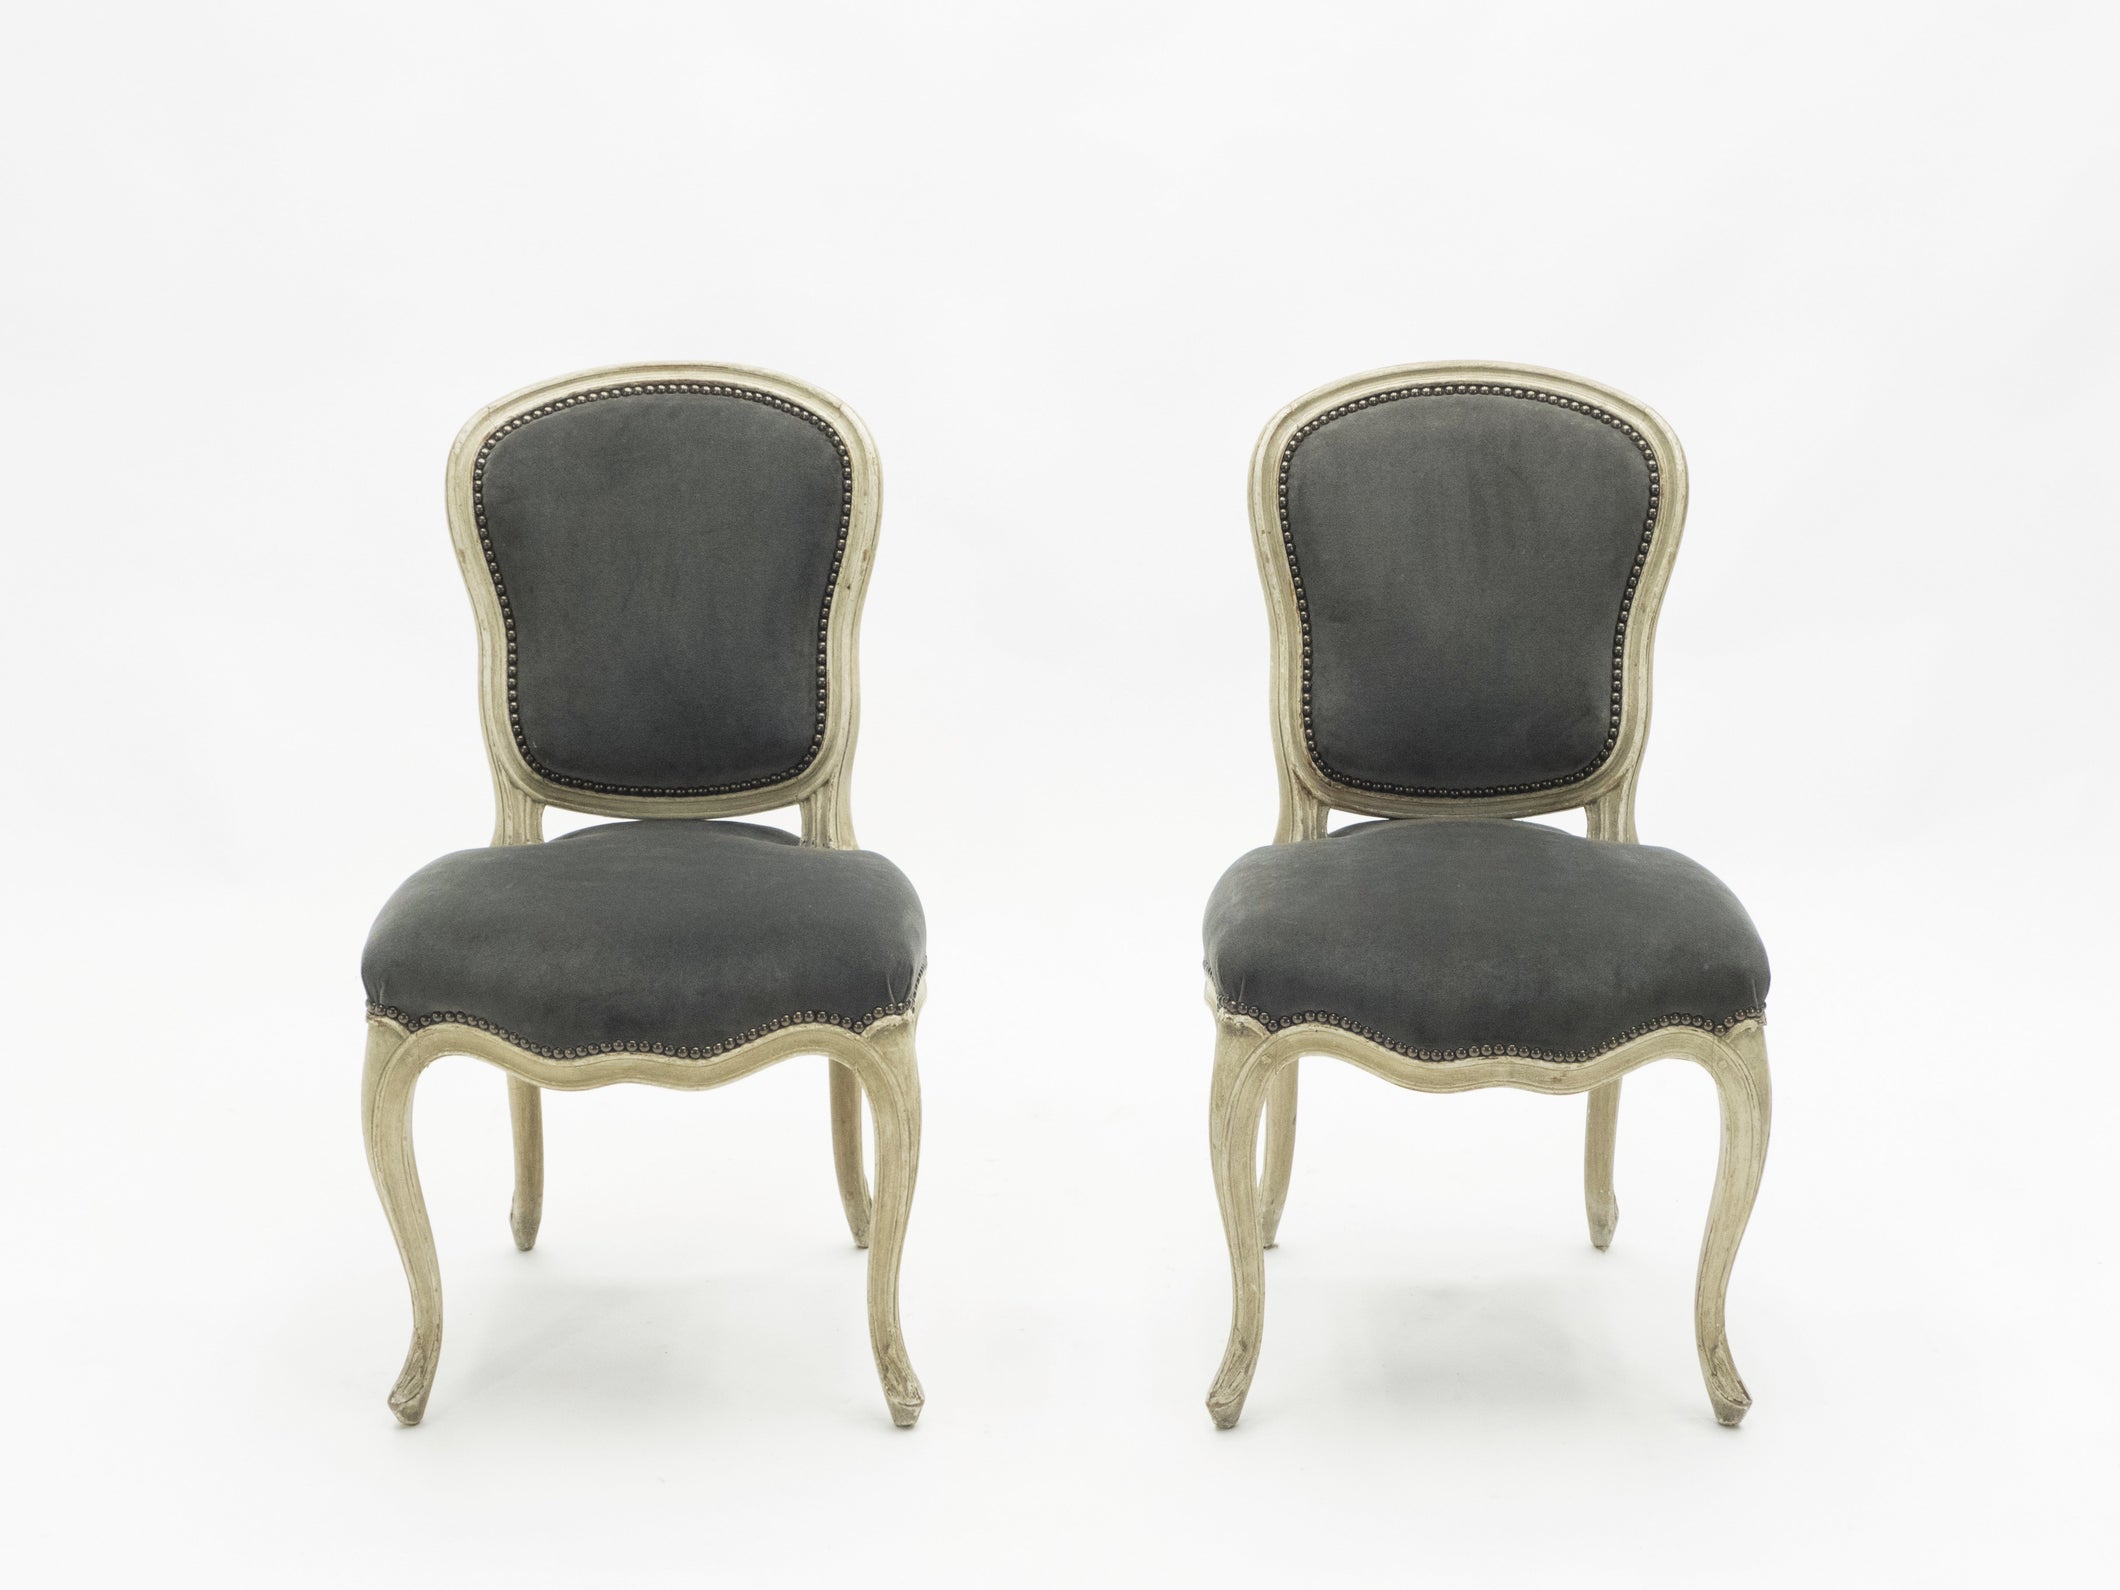 Rare pair of stamped Maison Jansen Louis XV neoclassical chairs 1940s